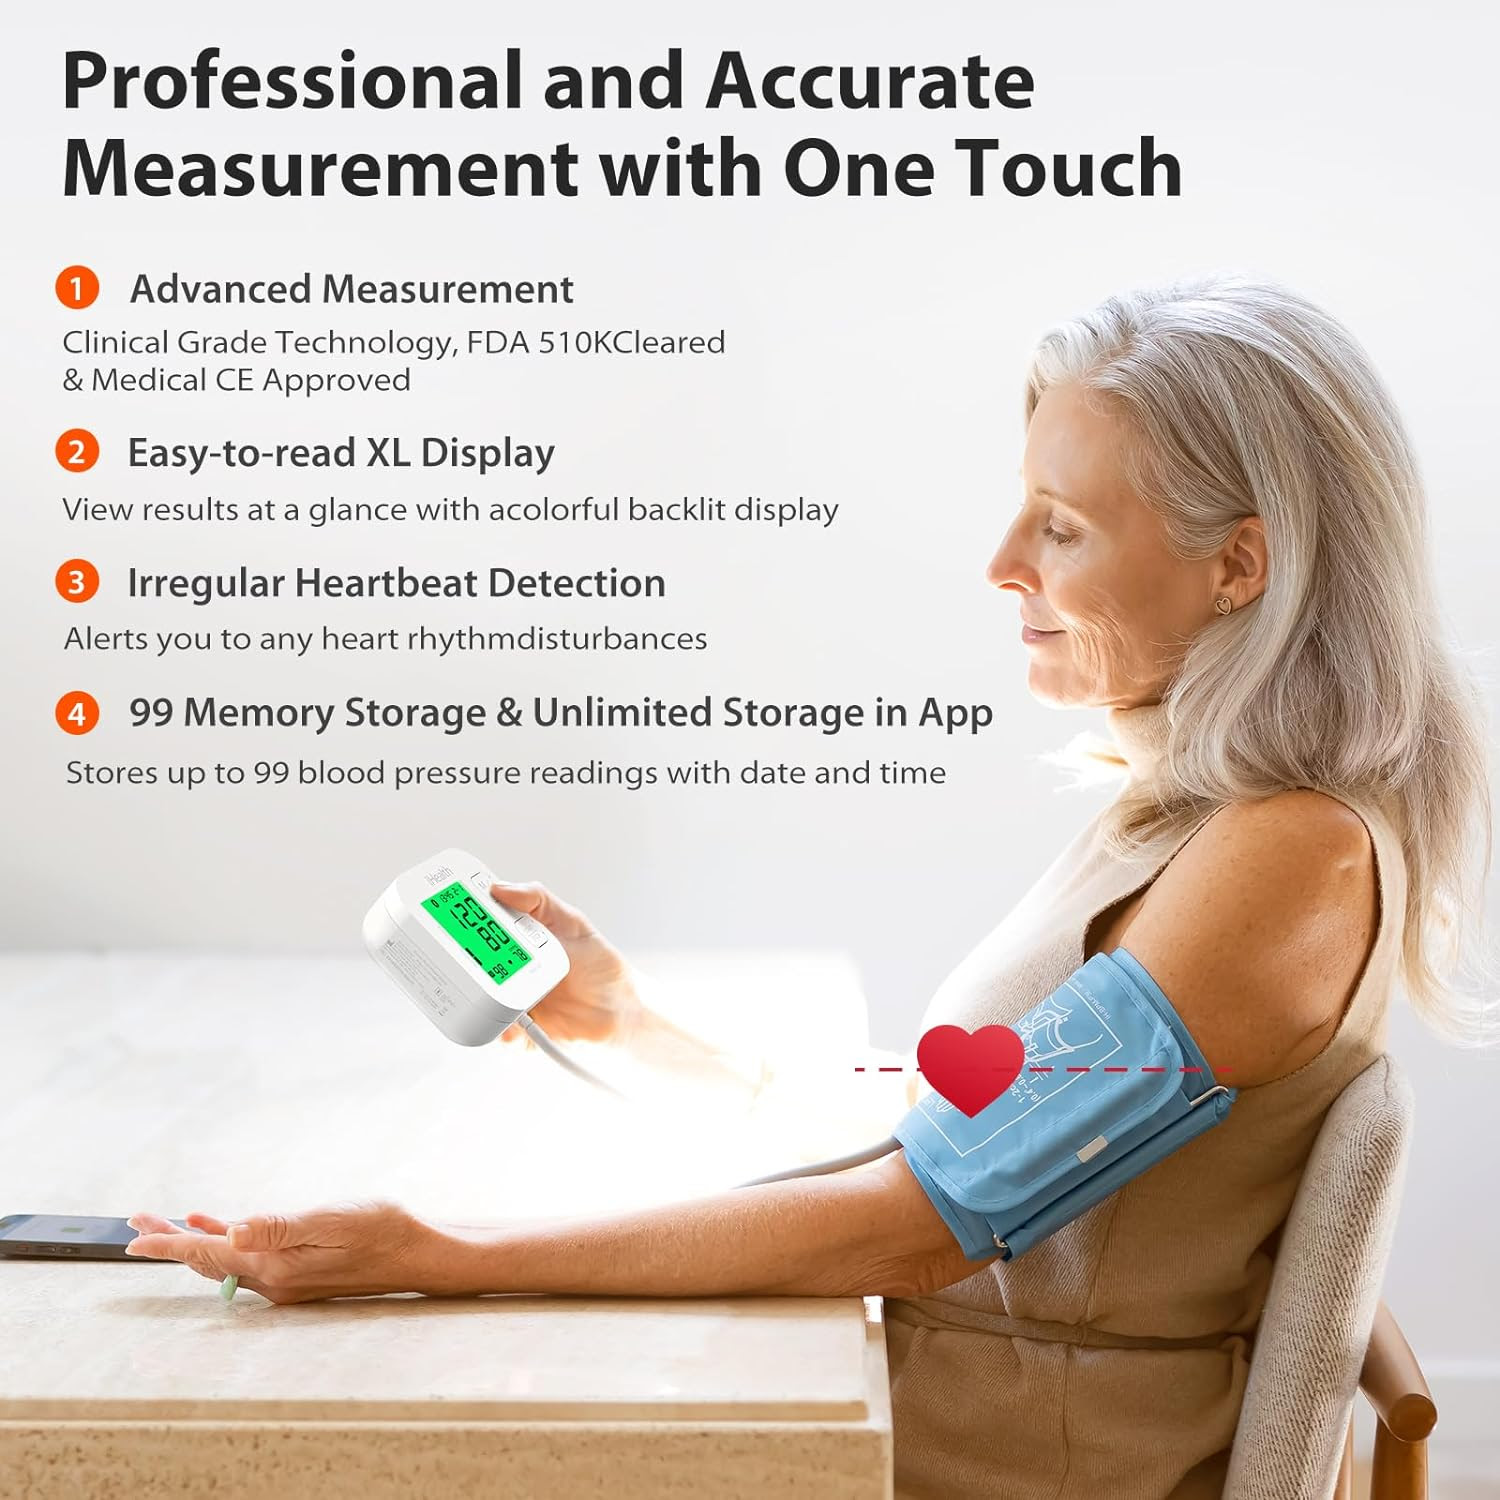 Smart Upper Arm Blood Pressure Monitor with Wide Range Cuff That fits Standard to Large Adult Arms, Bluetooth Compatible for iOS & Android Devices                               